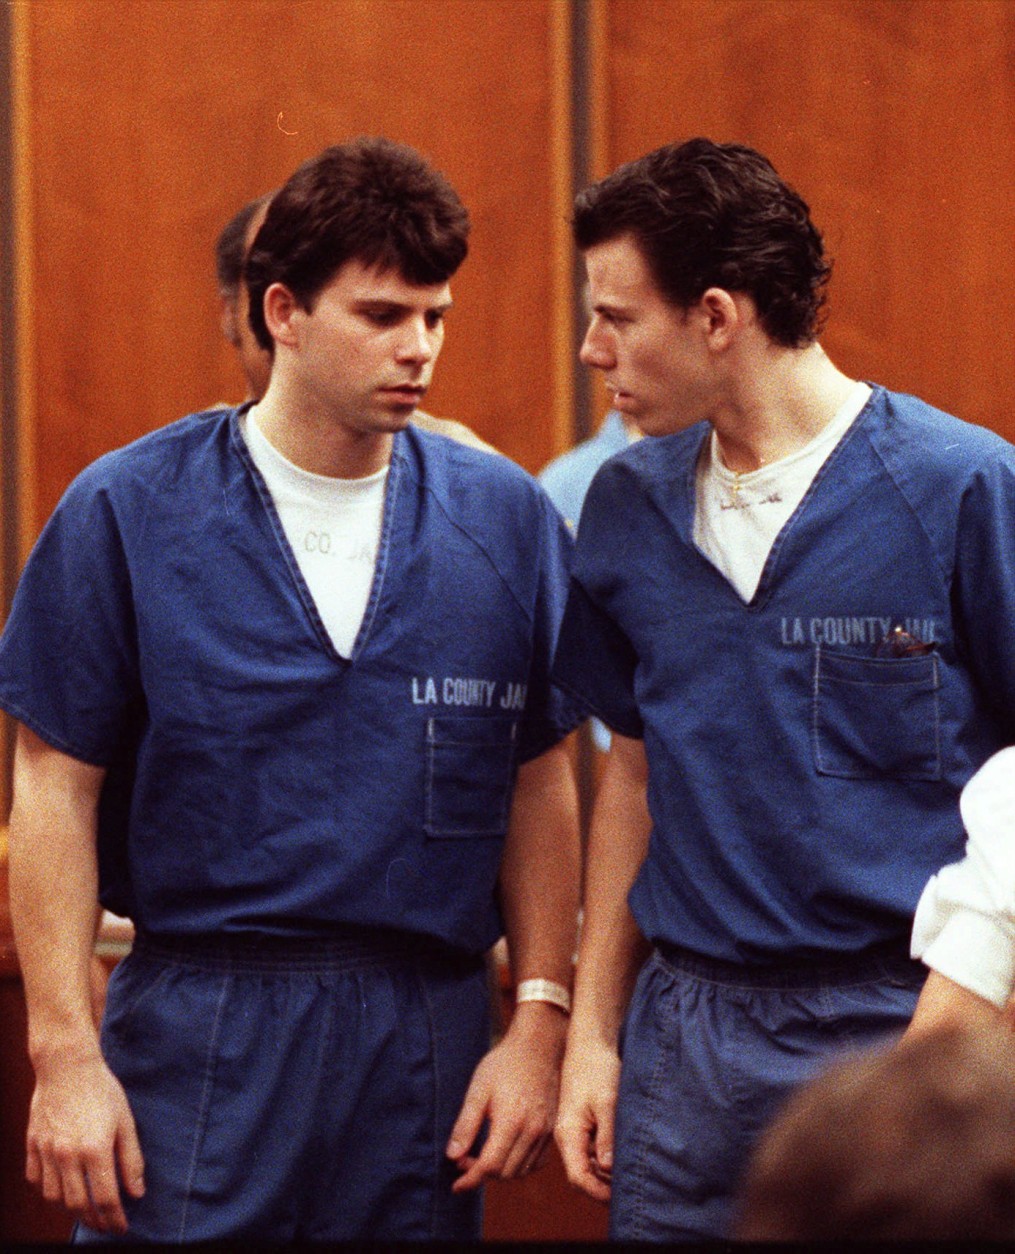 FILE--Lyle, left, and Erik Menendez leave the courtroom in Santa Monica, Calif., in this Aug. 6, 1990 file photo.   The brothers were found were found guilty of first-degree murder and conspiracy Wednesday, March 20, 1996,  of the August 1989 murders of their parents in their second trial in the Van Nuys Superior Court in Los Angeles. (AP Photo/Nick Ut, File)